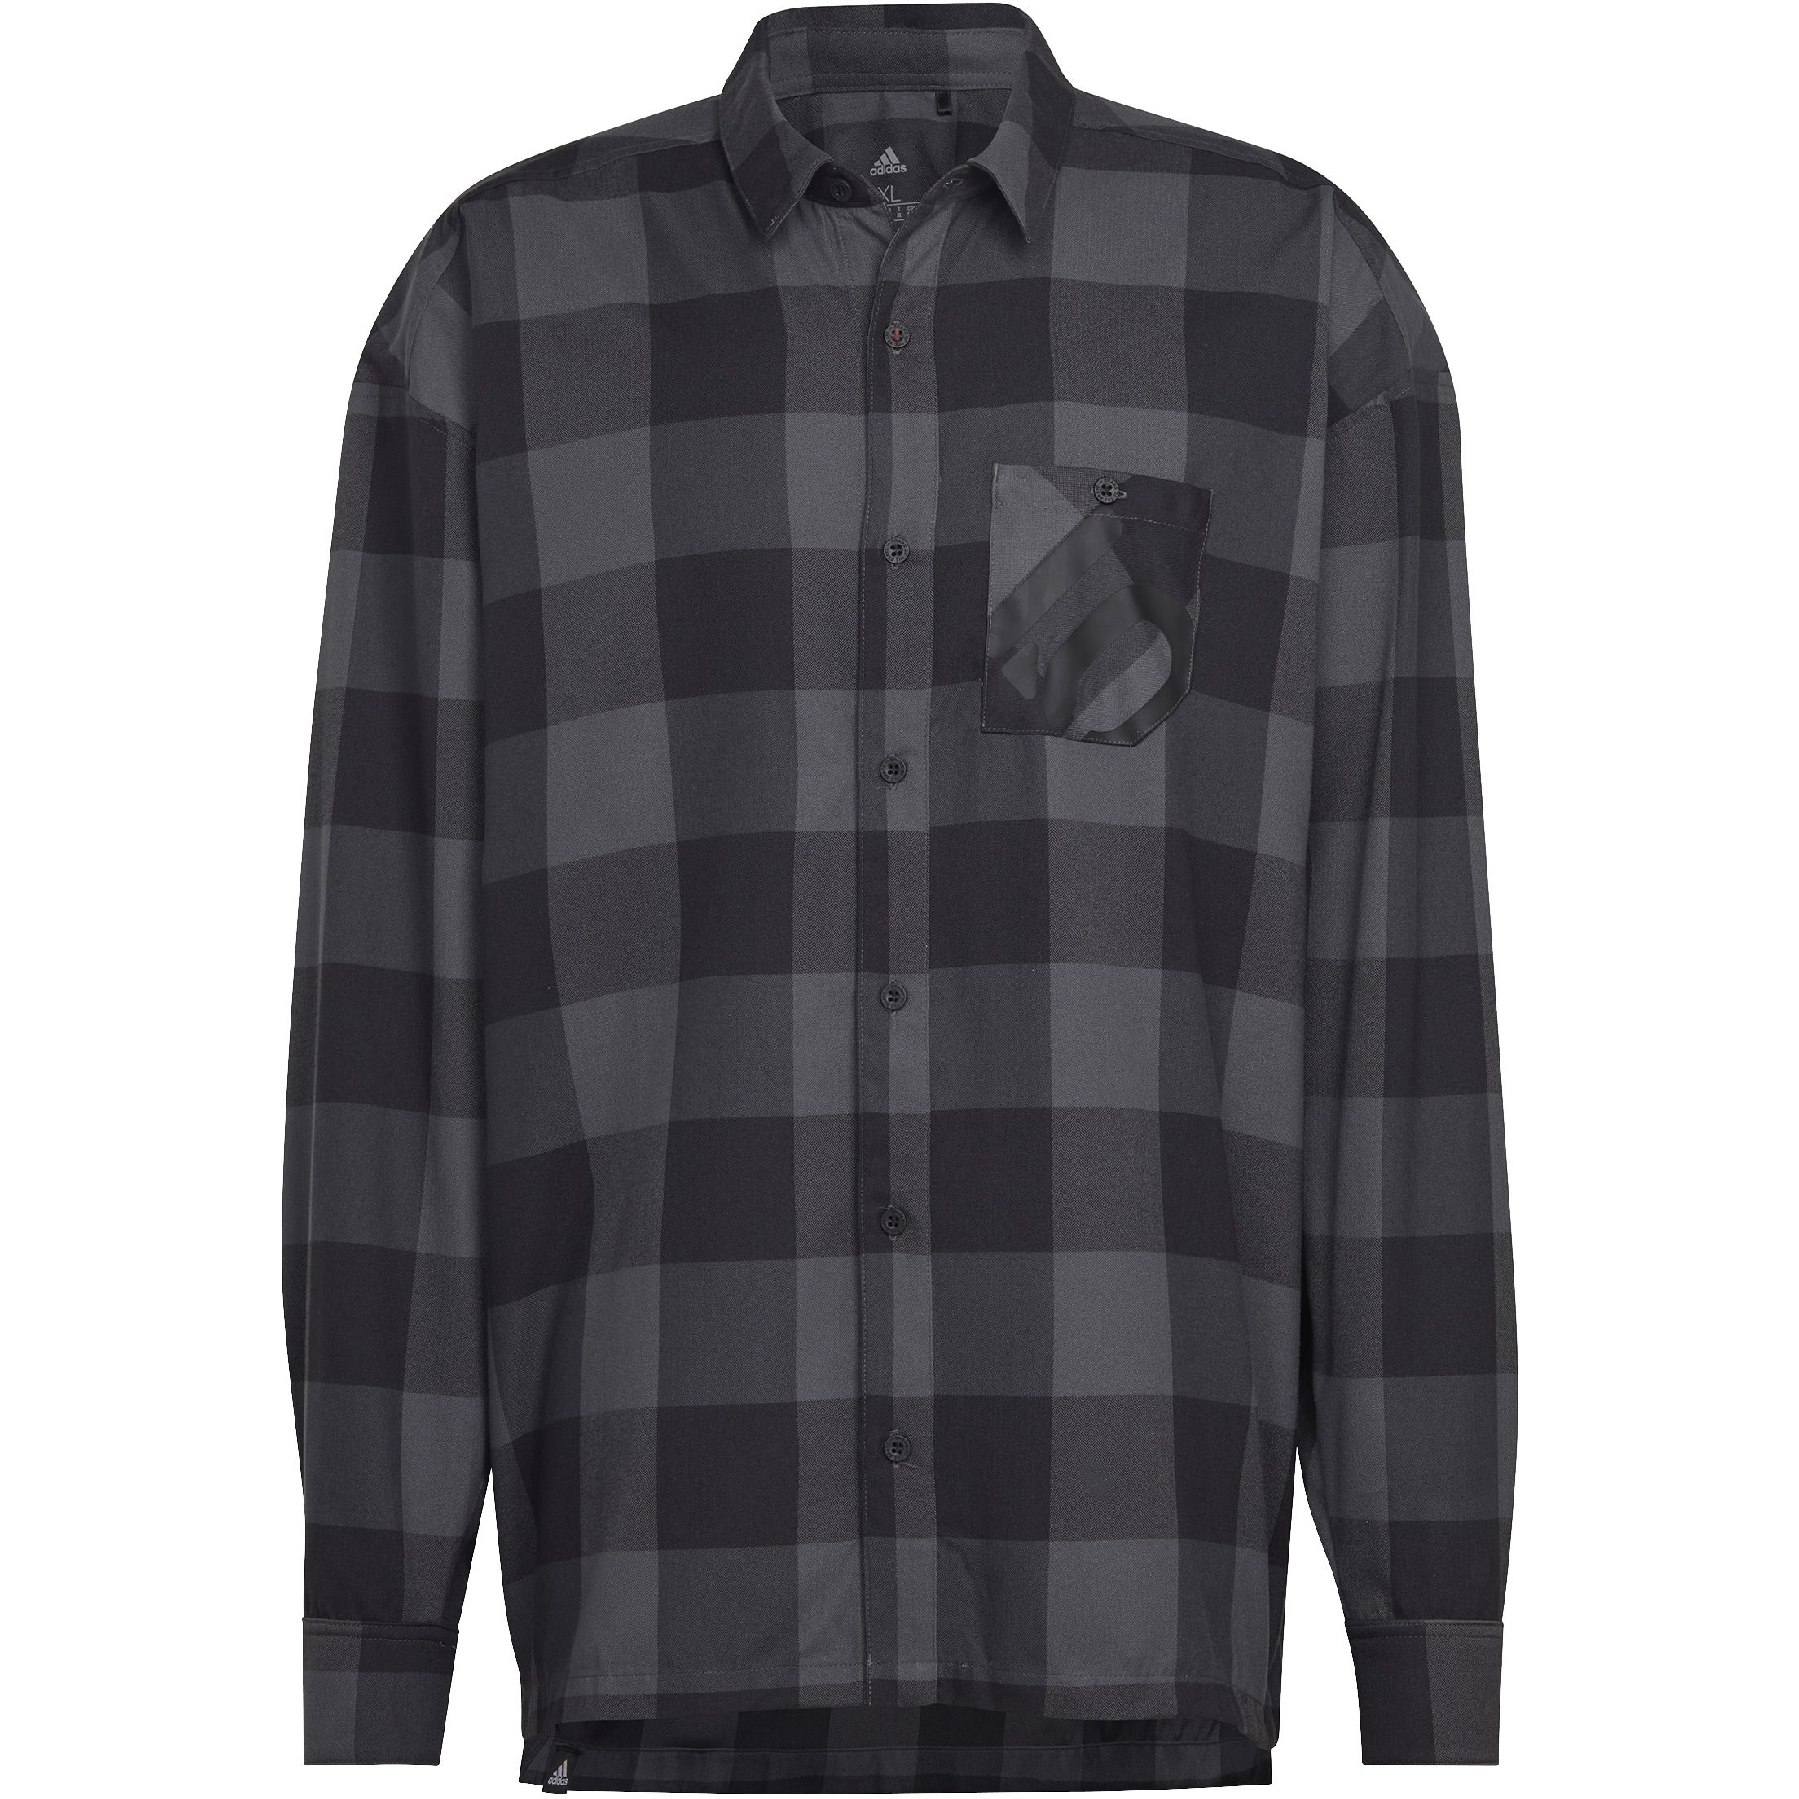 Picture of Five Ten Brand of the Brave Flannel Long Sleeve Top - Grey Six / Black